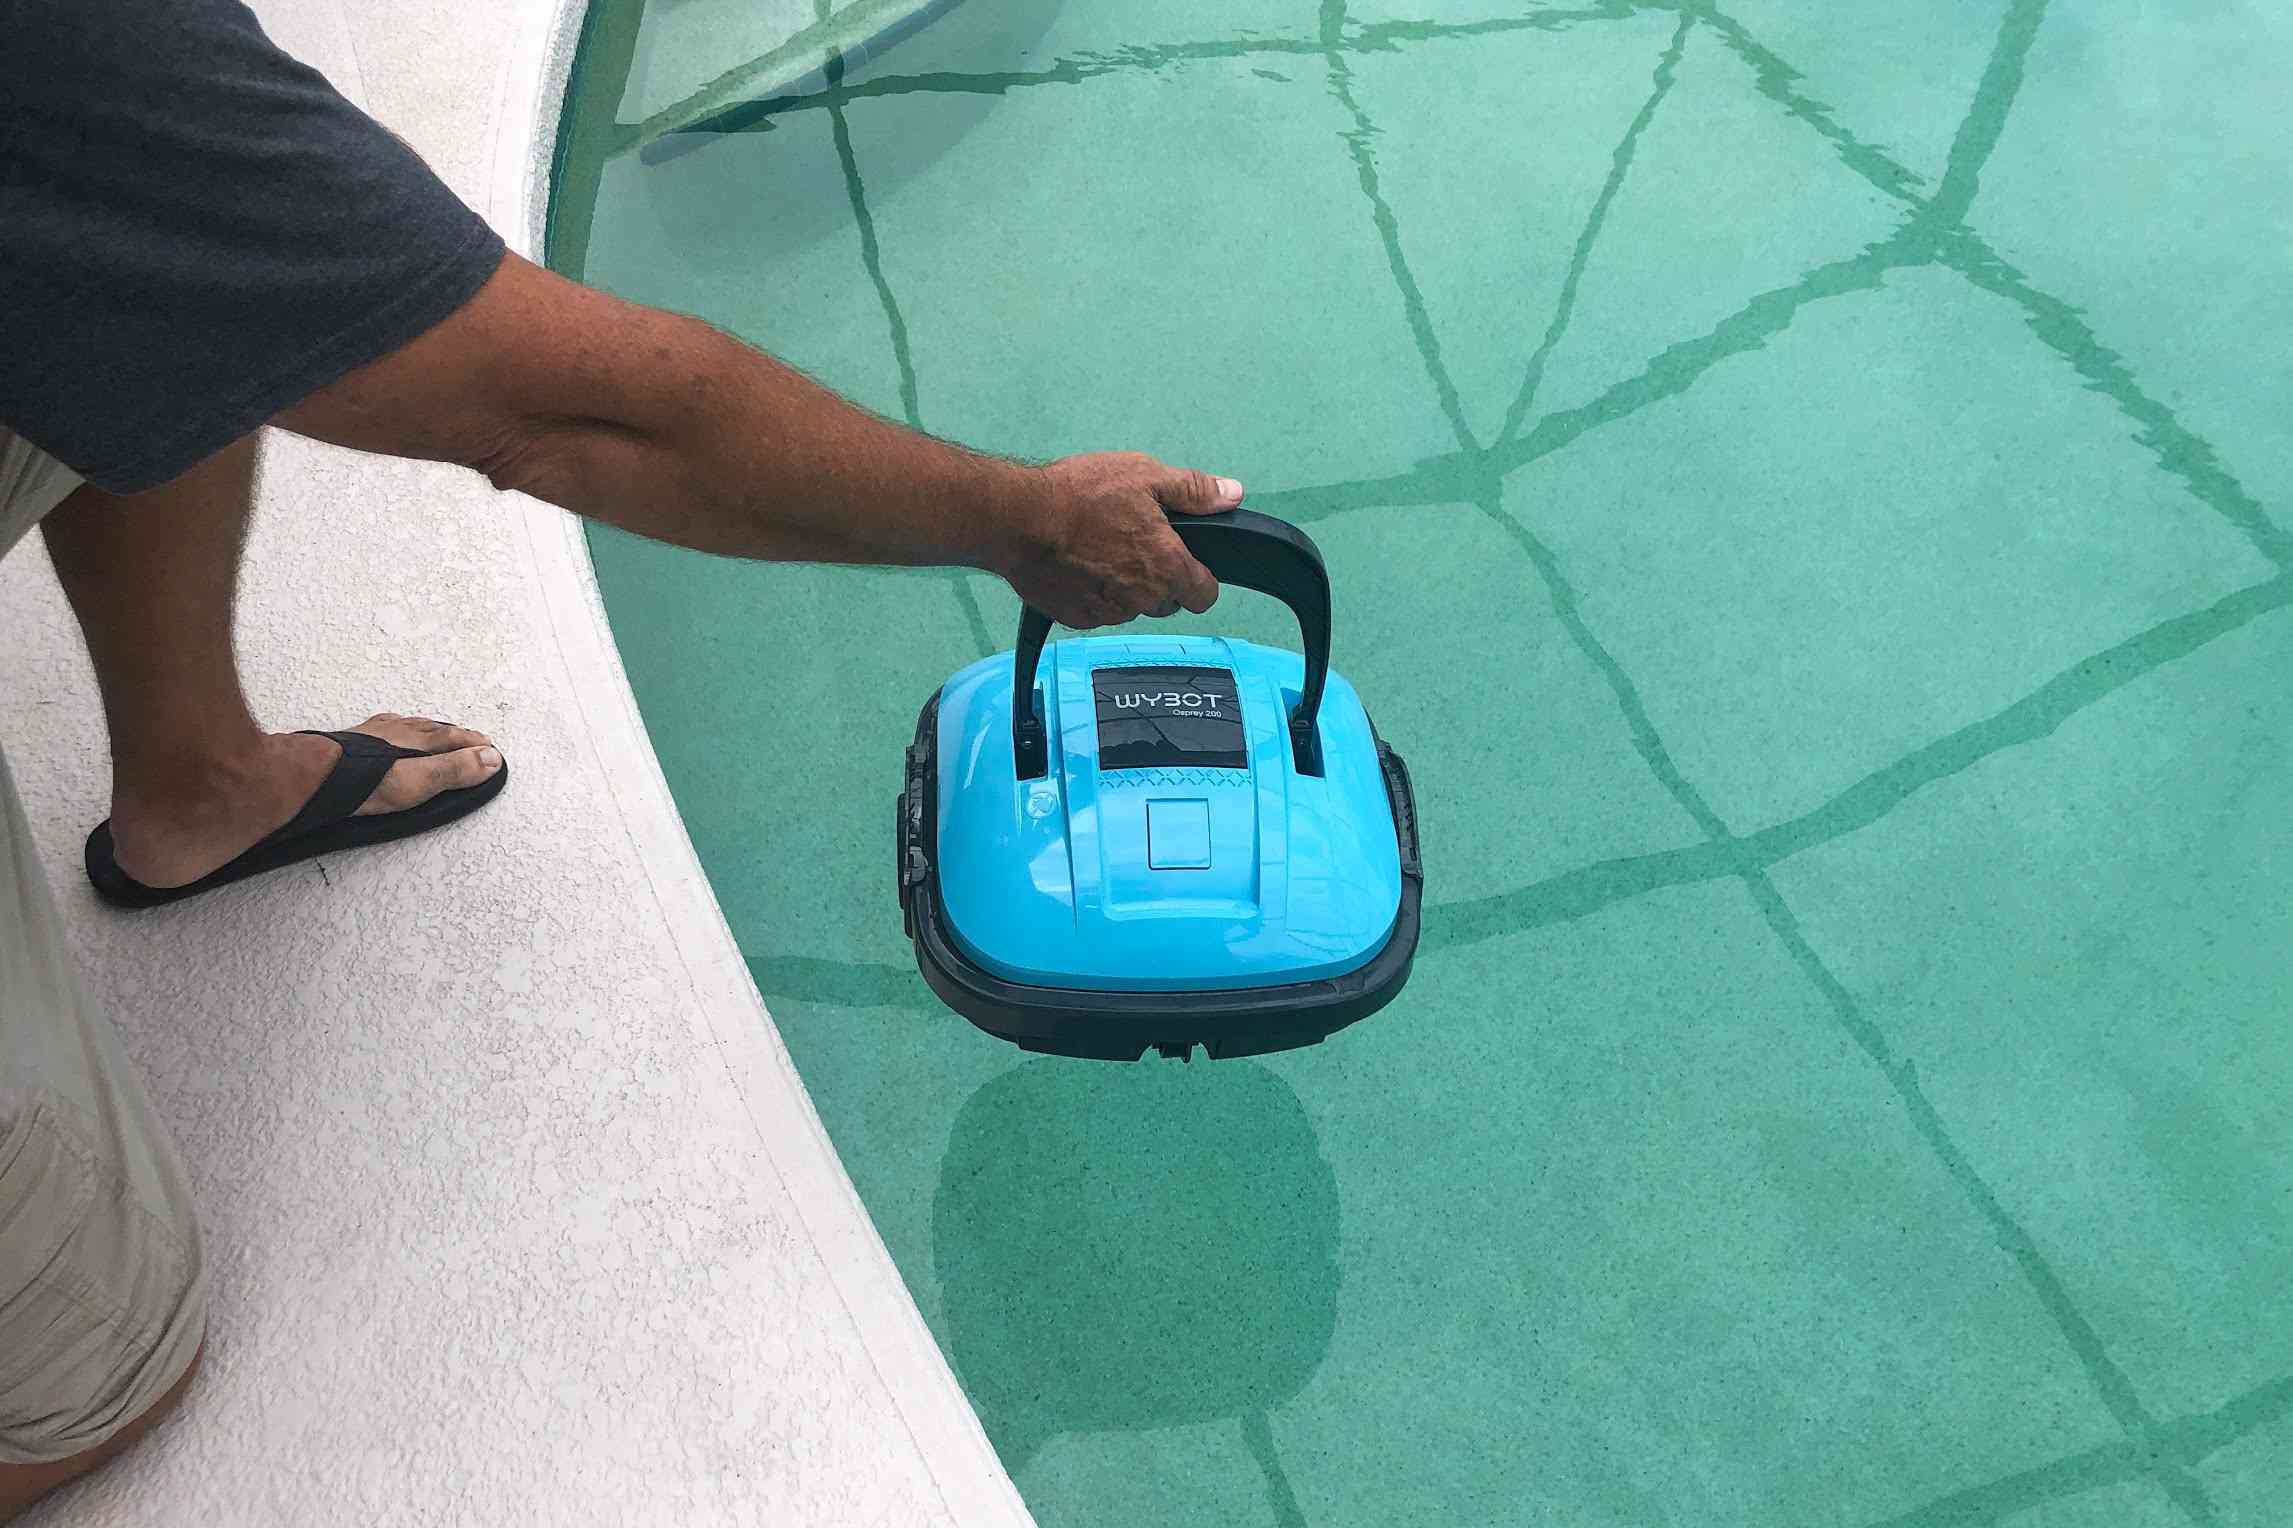 A person places the WYBOT Cordless Robotic Pool Cleaner into a pool